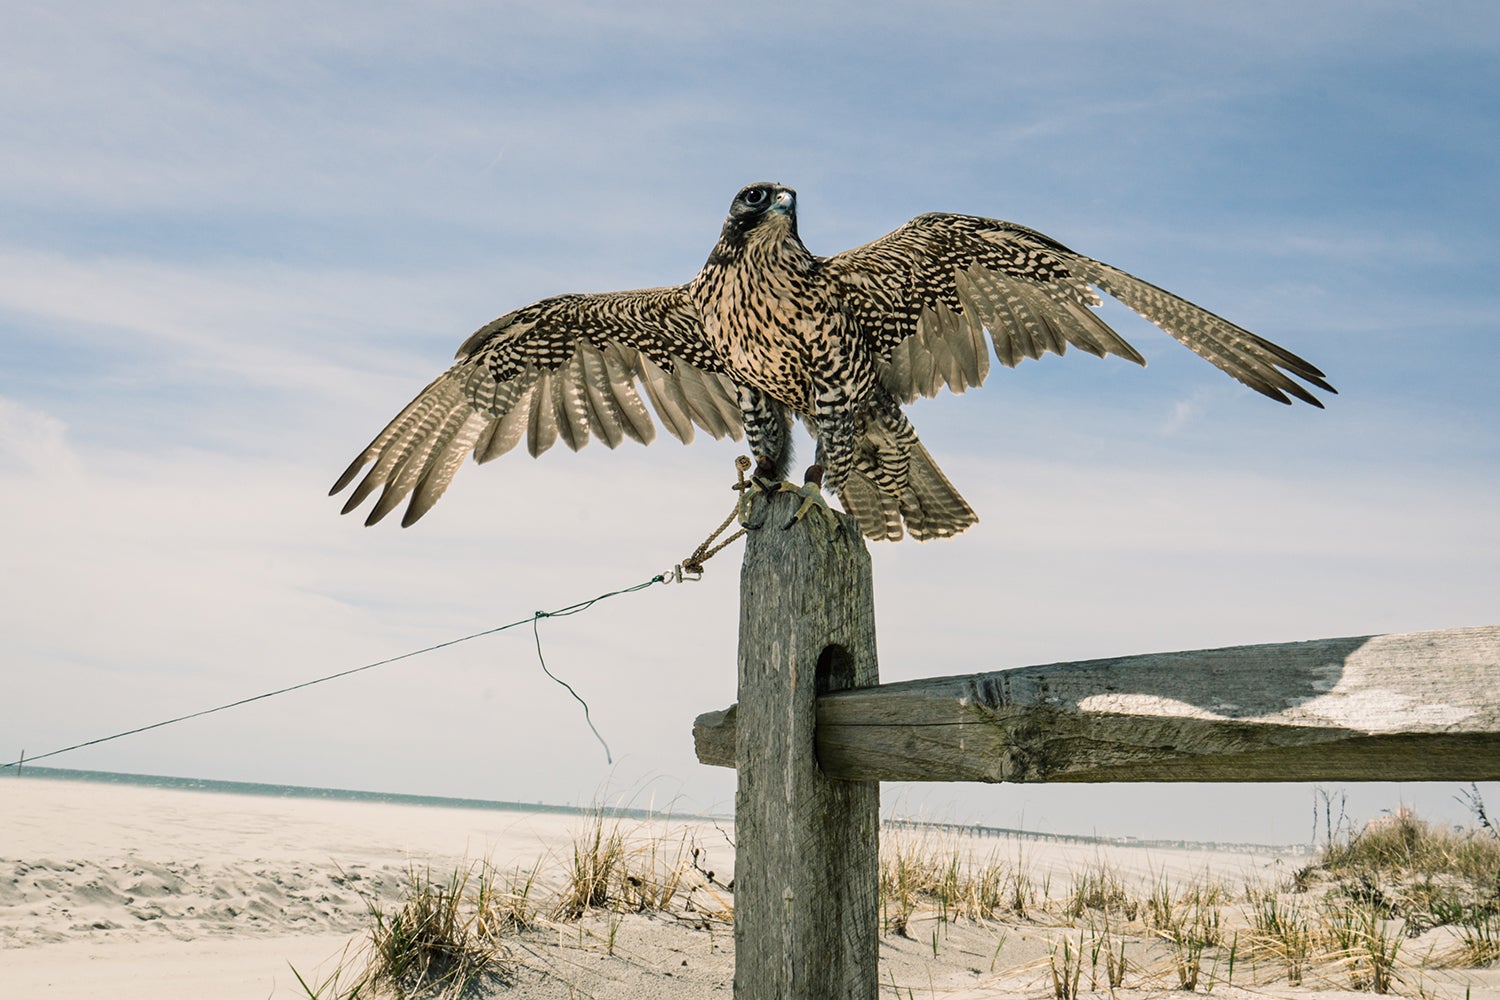 falcon spreads his wings while sitting on beach-side post